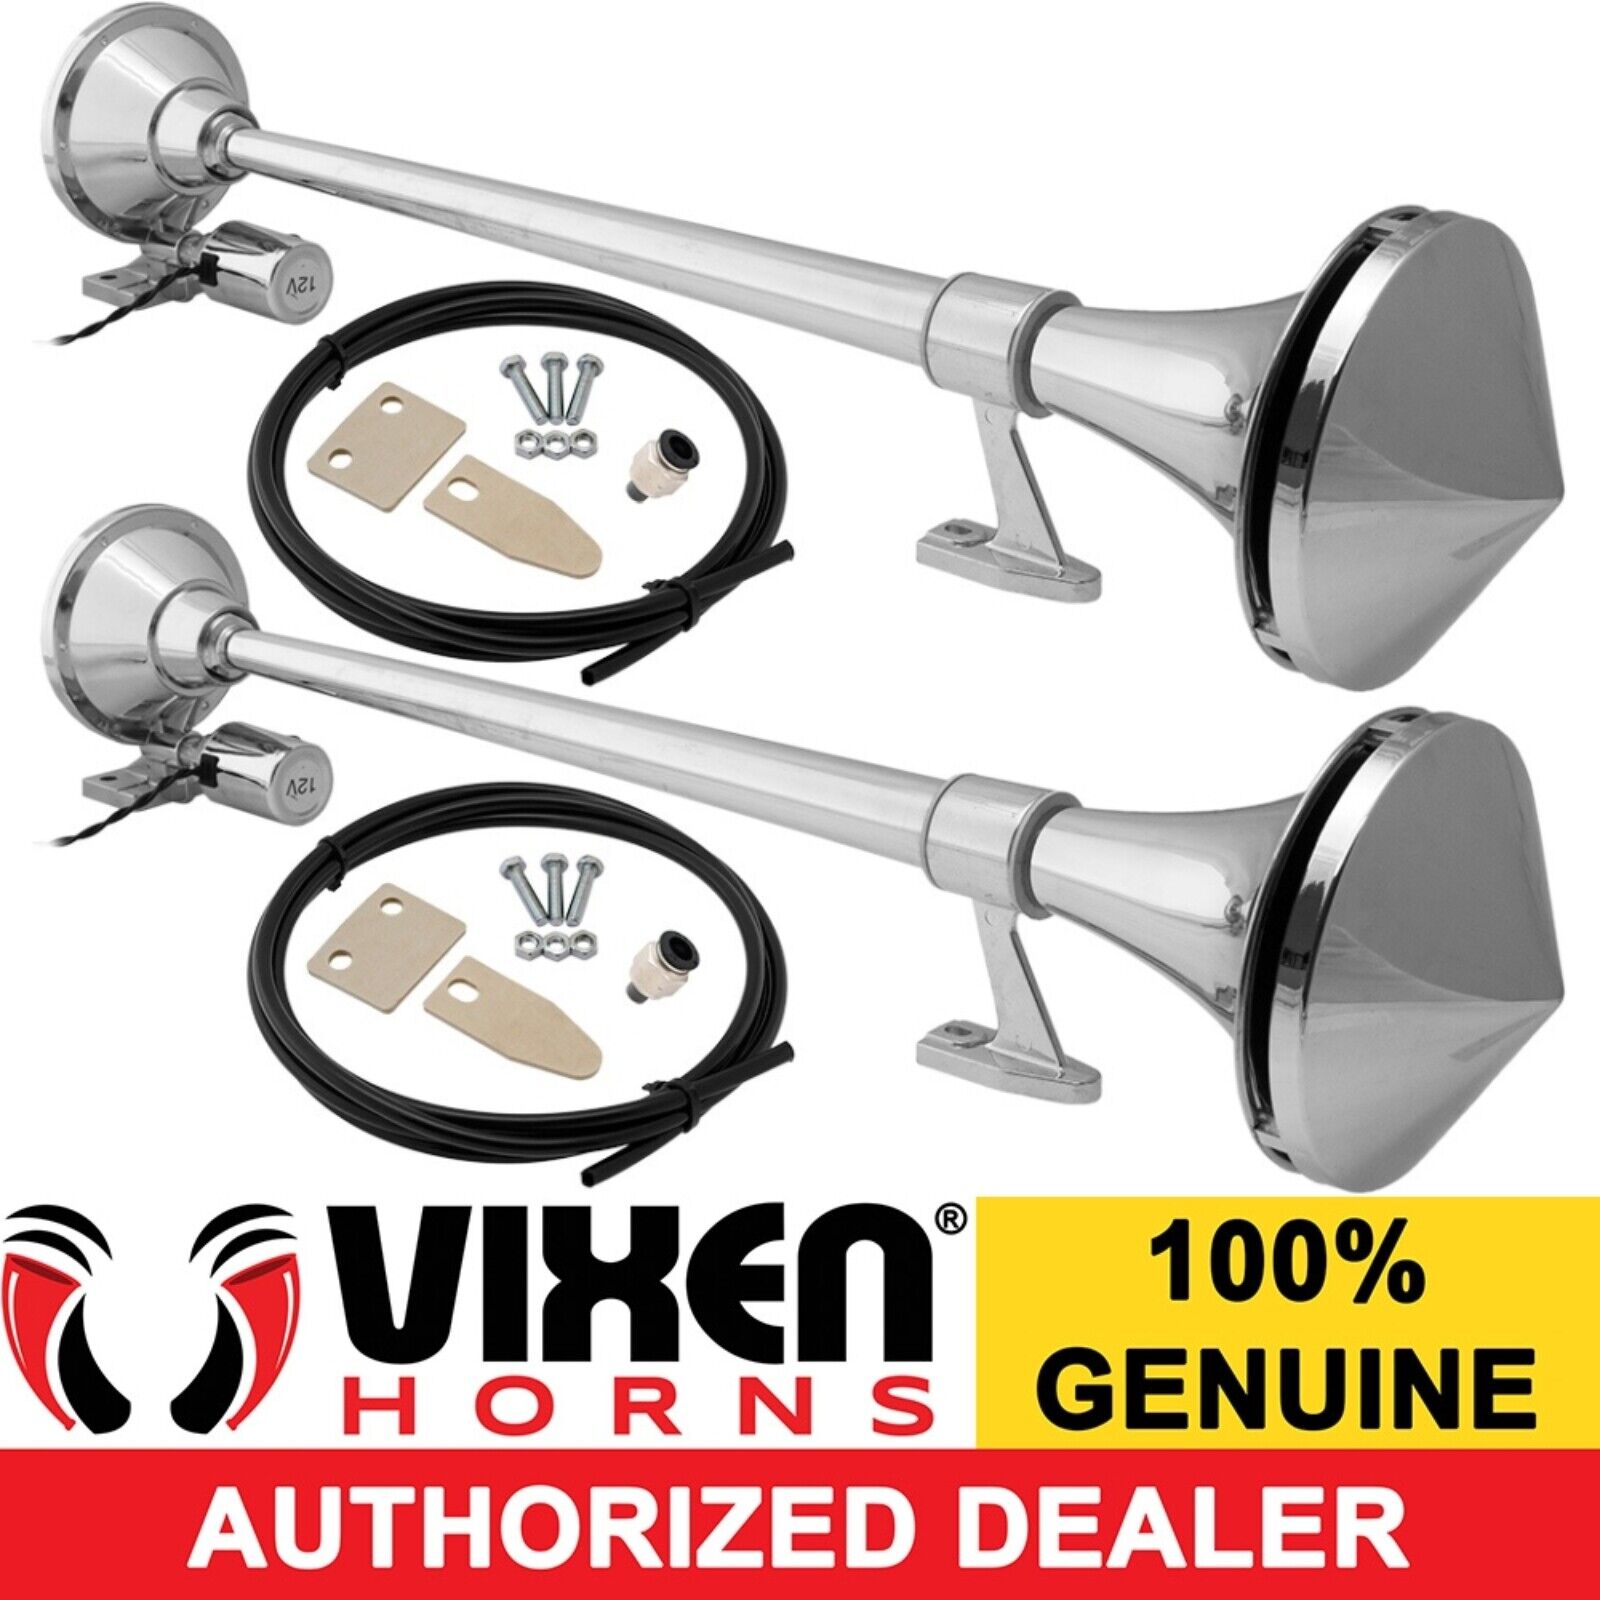 VIXEN HORNS TRAIN AIR HORN 2 TRUMPETS CHROME PLATED WATERPROOF FOR BOAT/TRUCK